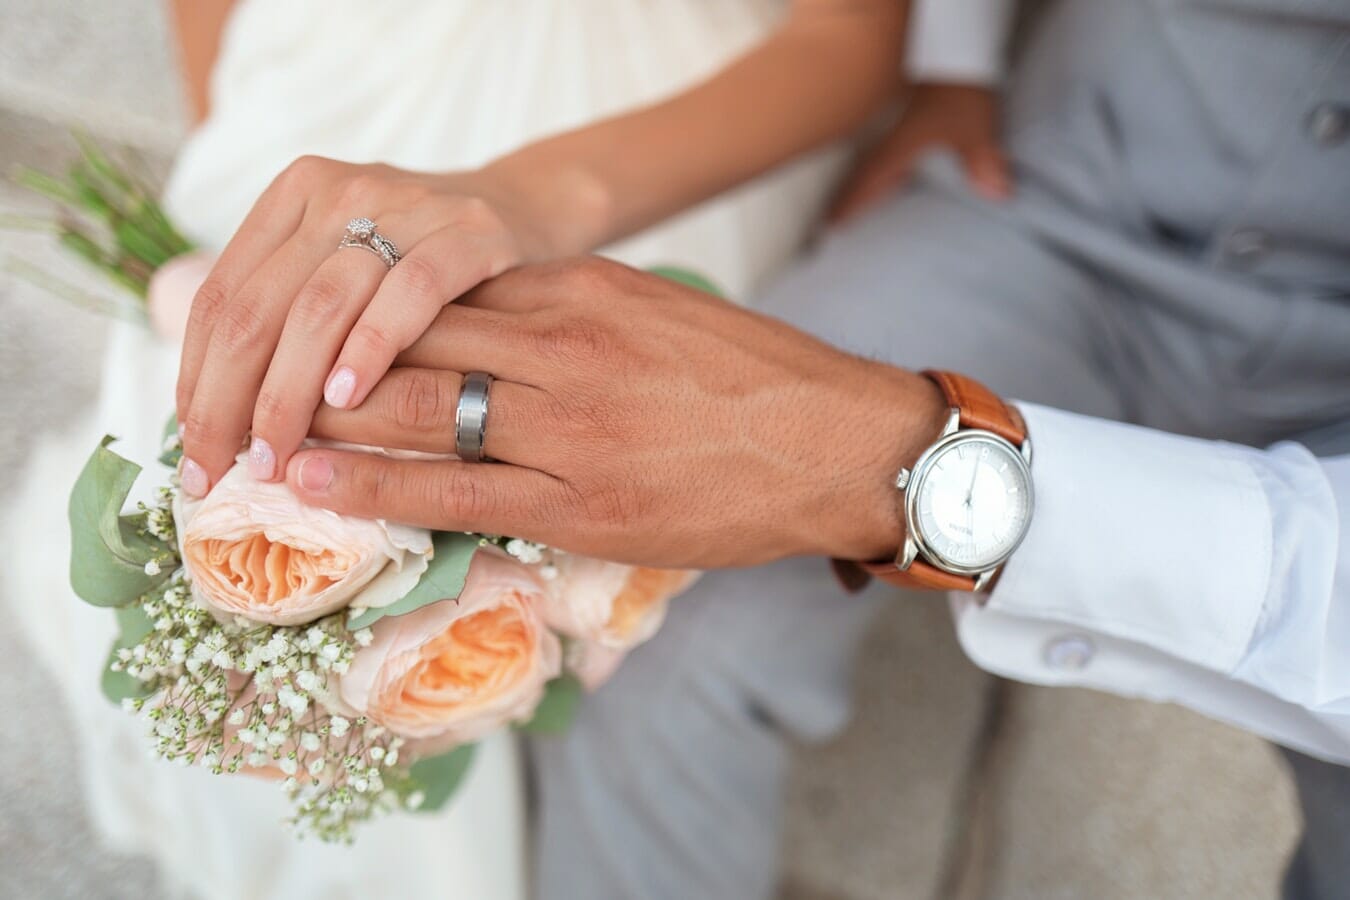 A couple showcasing their wedding rings during the Marriage Allowance ceremony.